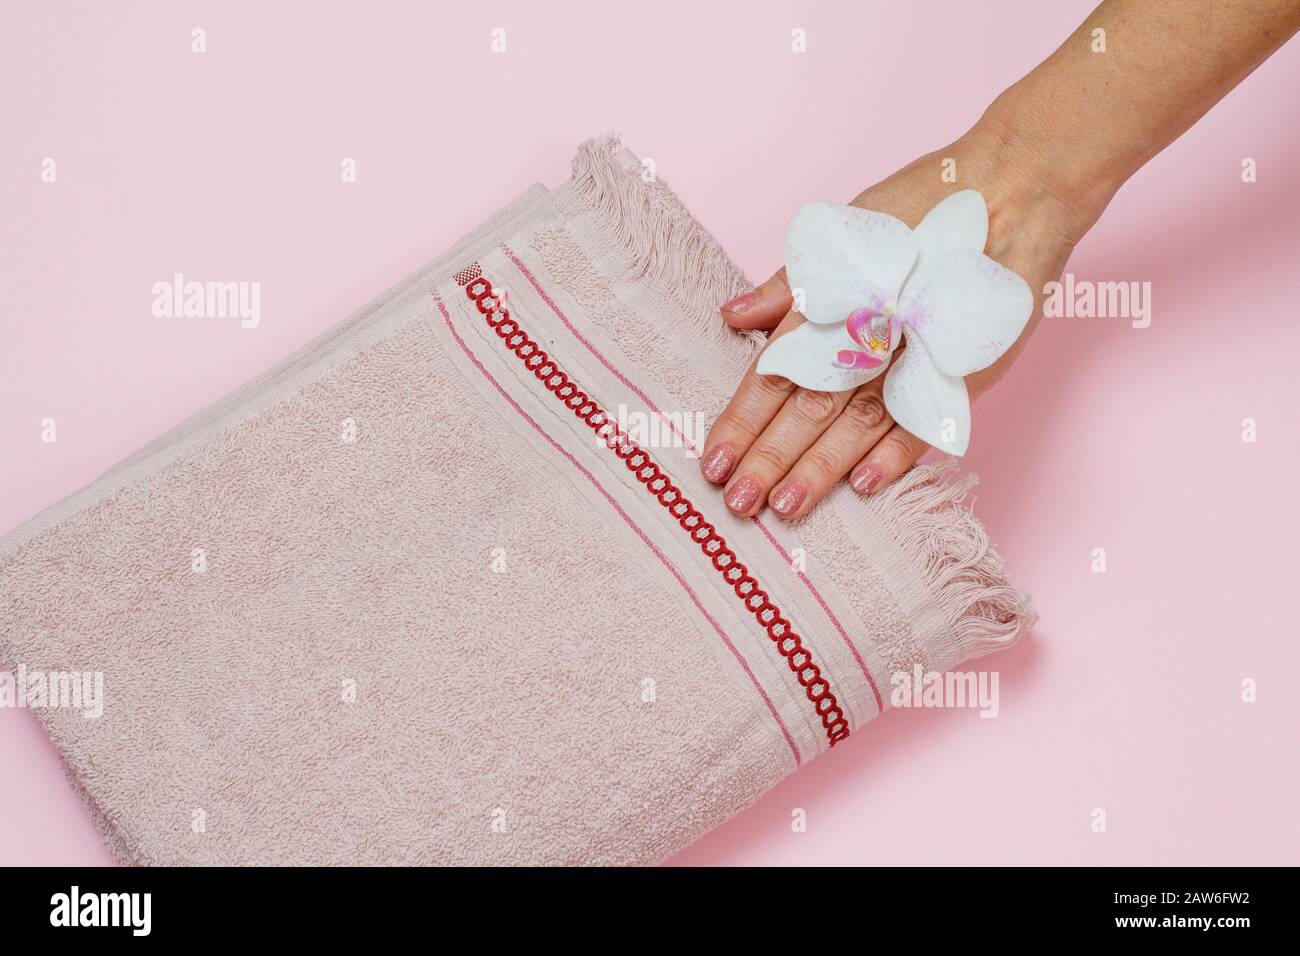 Soft terry towel, woman's hand with white orchid flower on pink background. Top view. Stock Photo